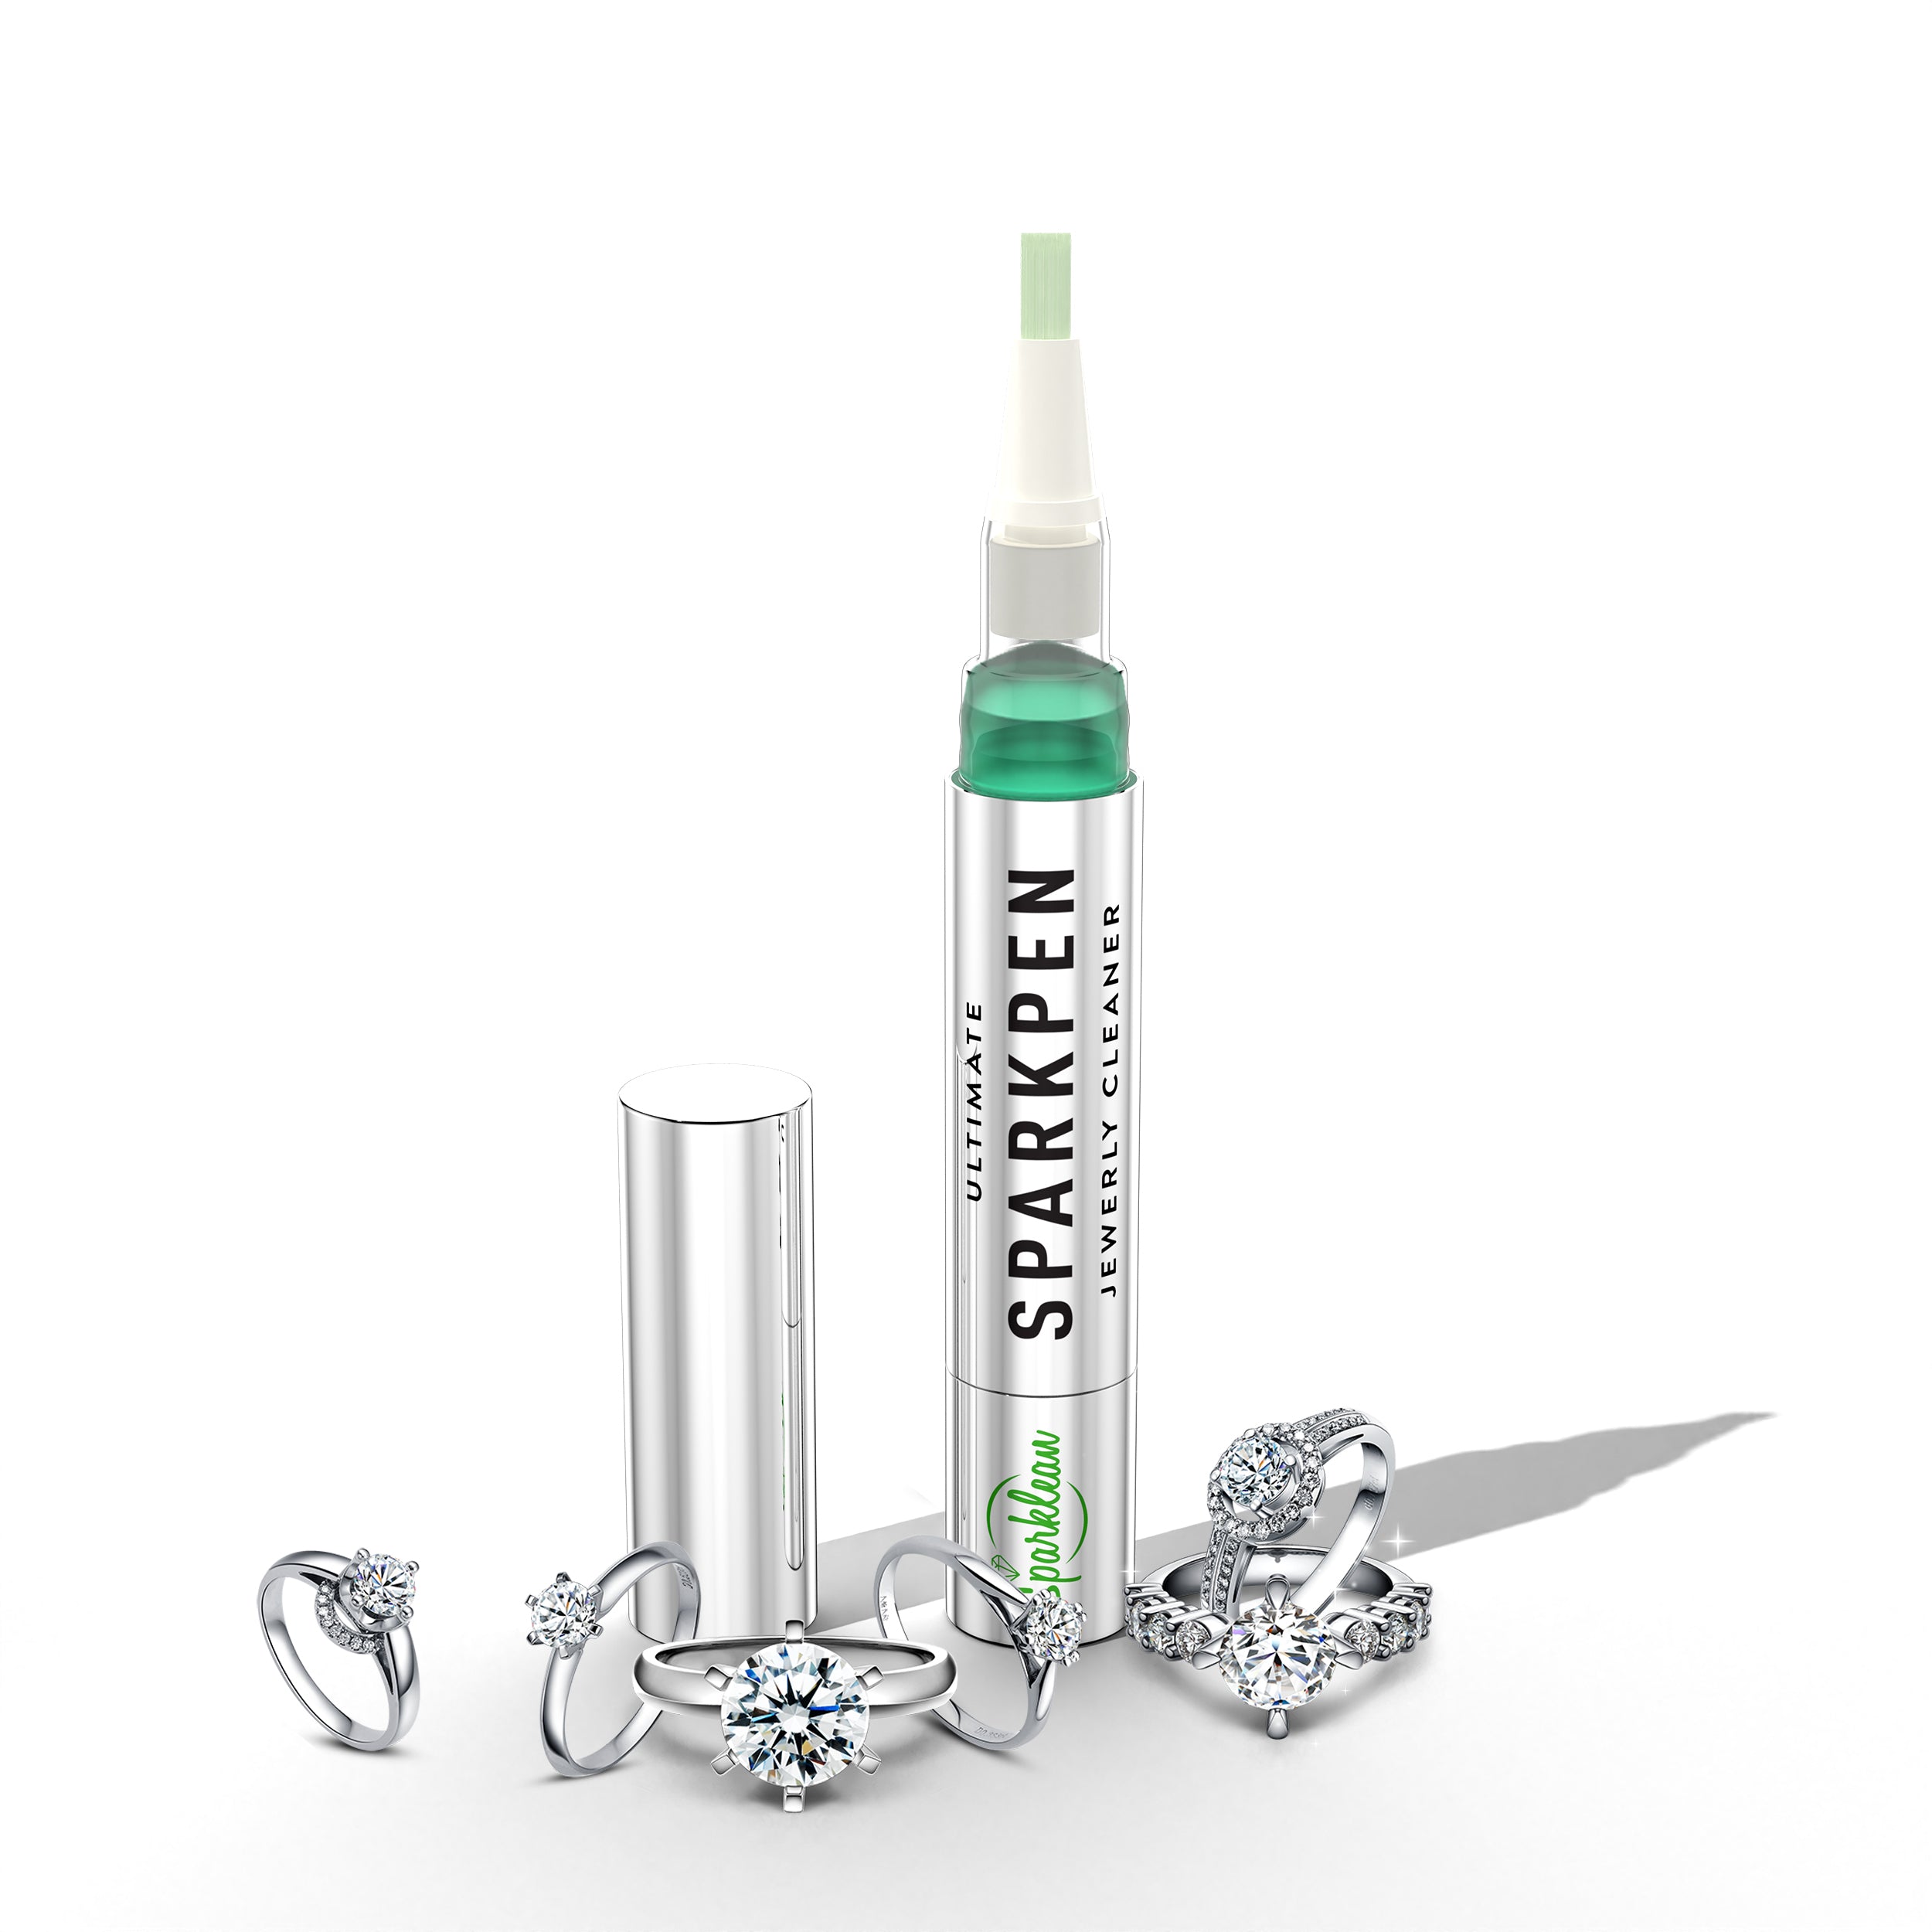 eep Your Jewelry Looking Like New with Sparklean Sparkpen Cleaner - Natural  and Non-Abrasive